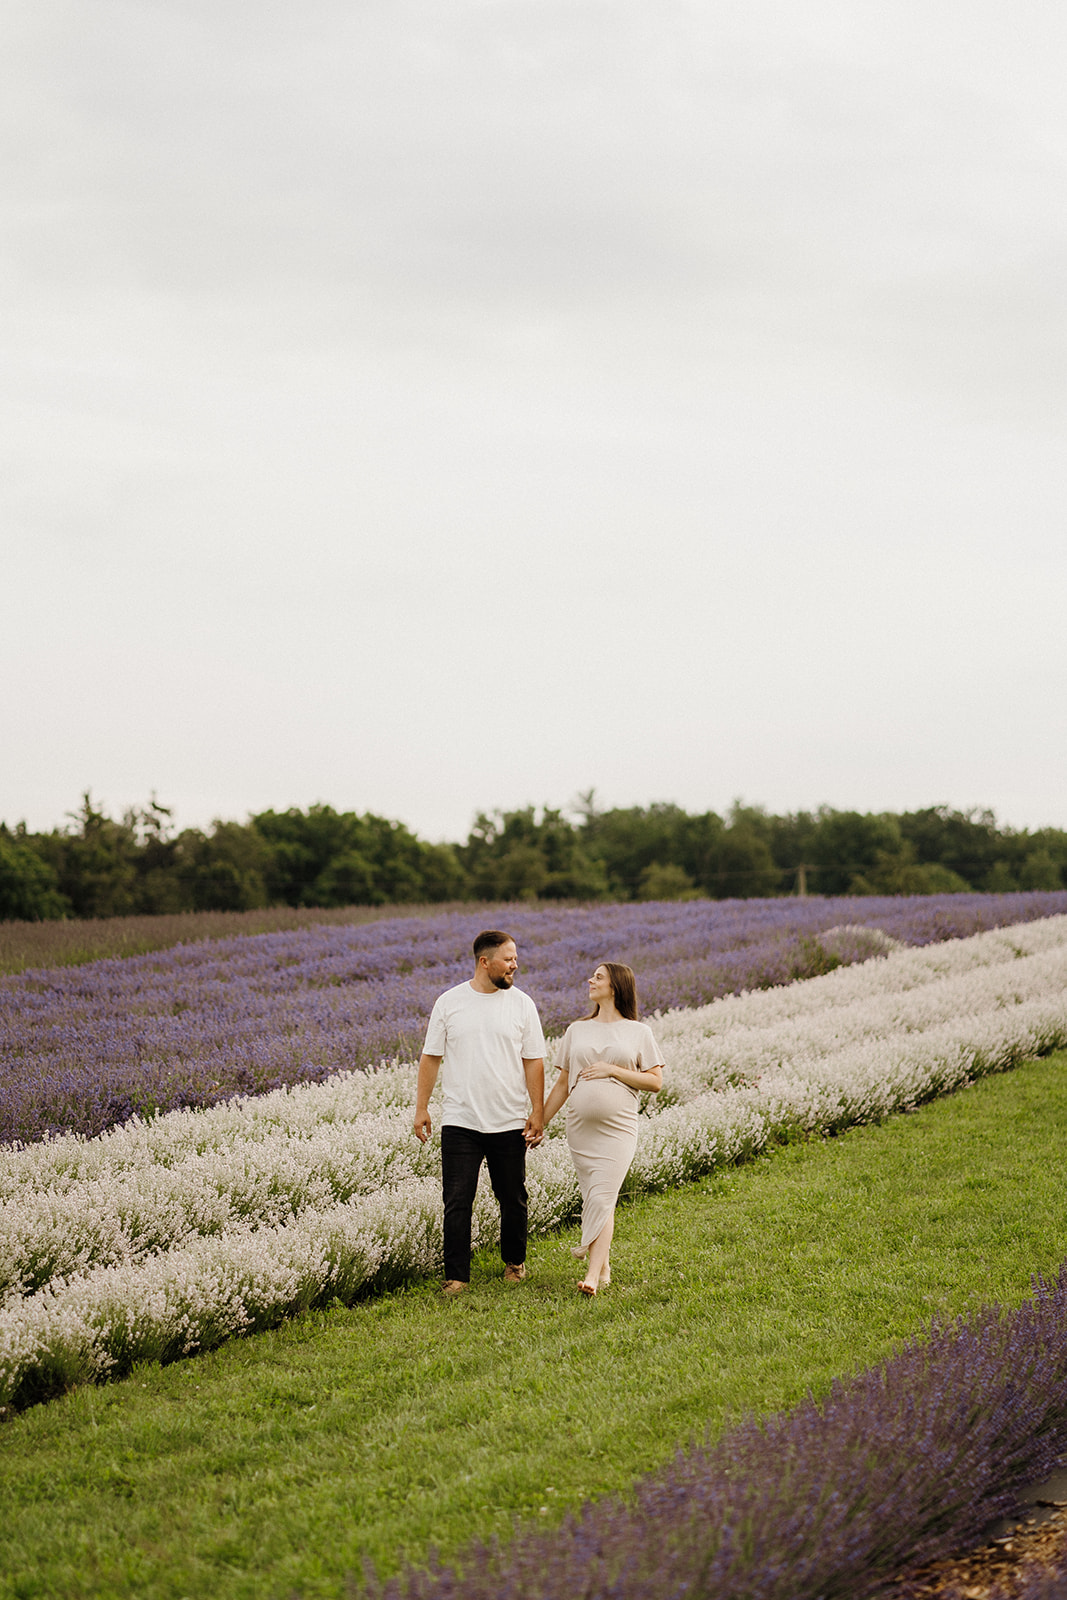 Man and woman hold hands while walking on the grass looking at each other by the lavender fields.